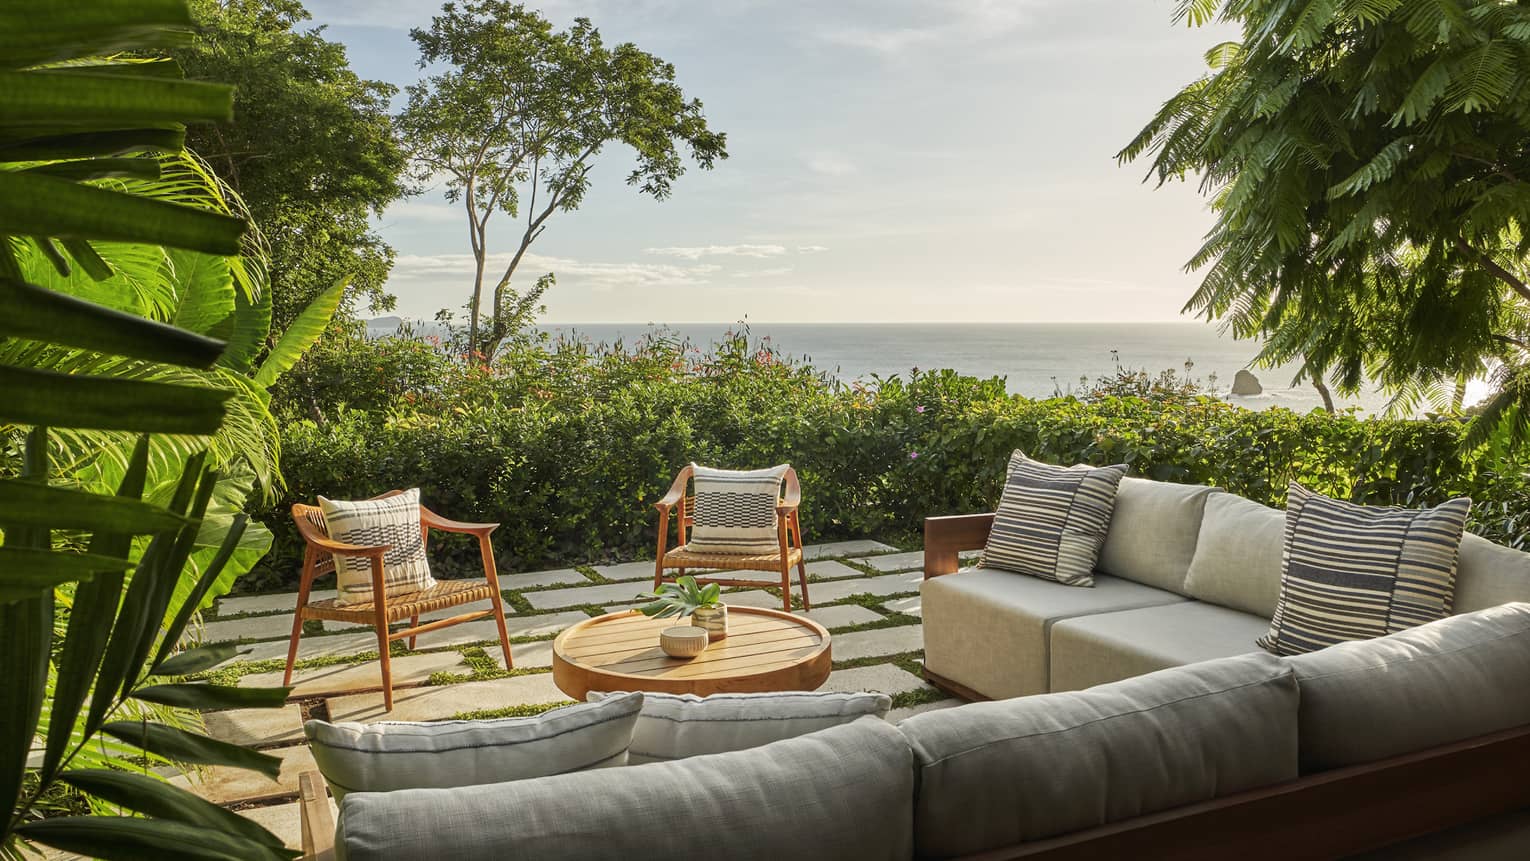 Outdoor lounge area with sectional sofa and two chairs, surrounded by green bushes and overlooking the sea